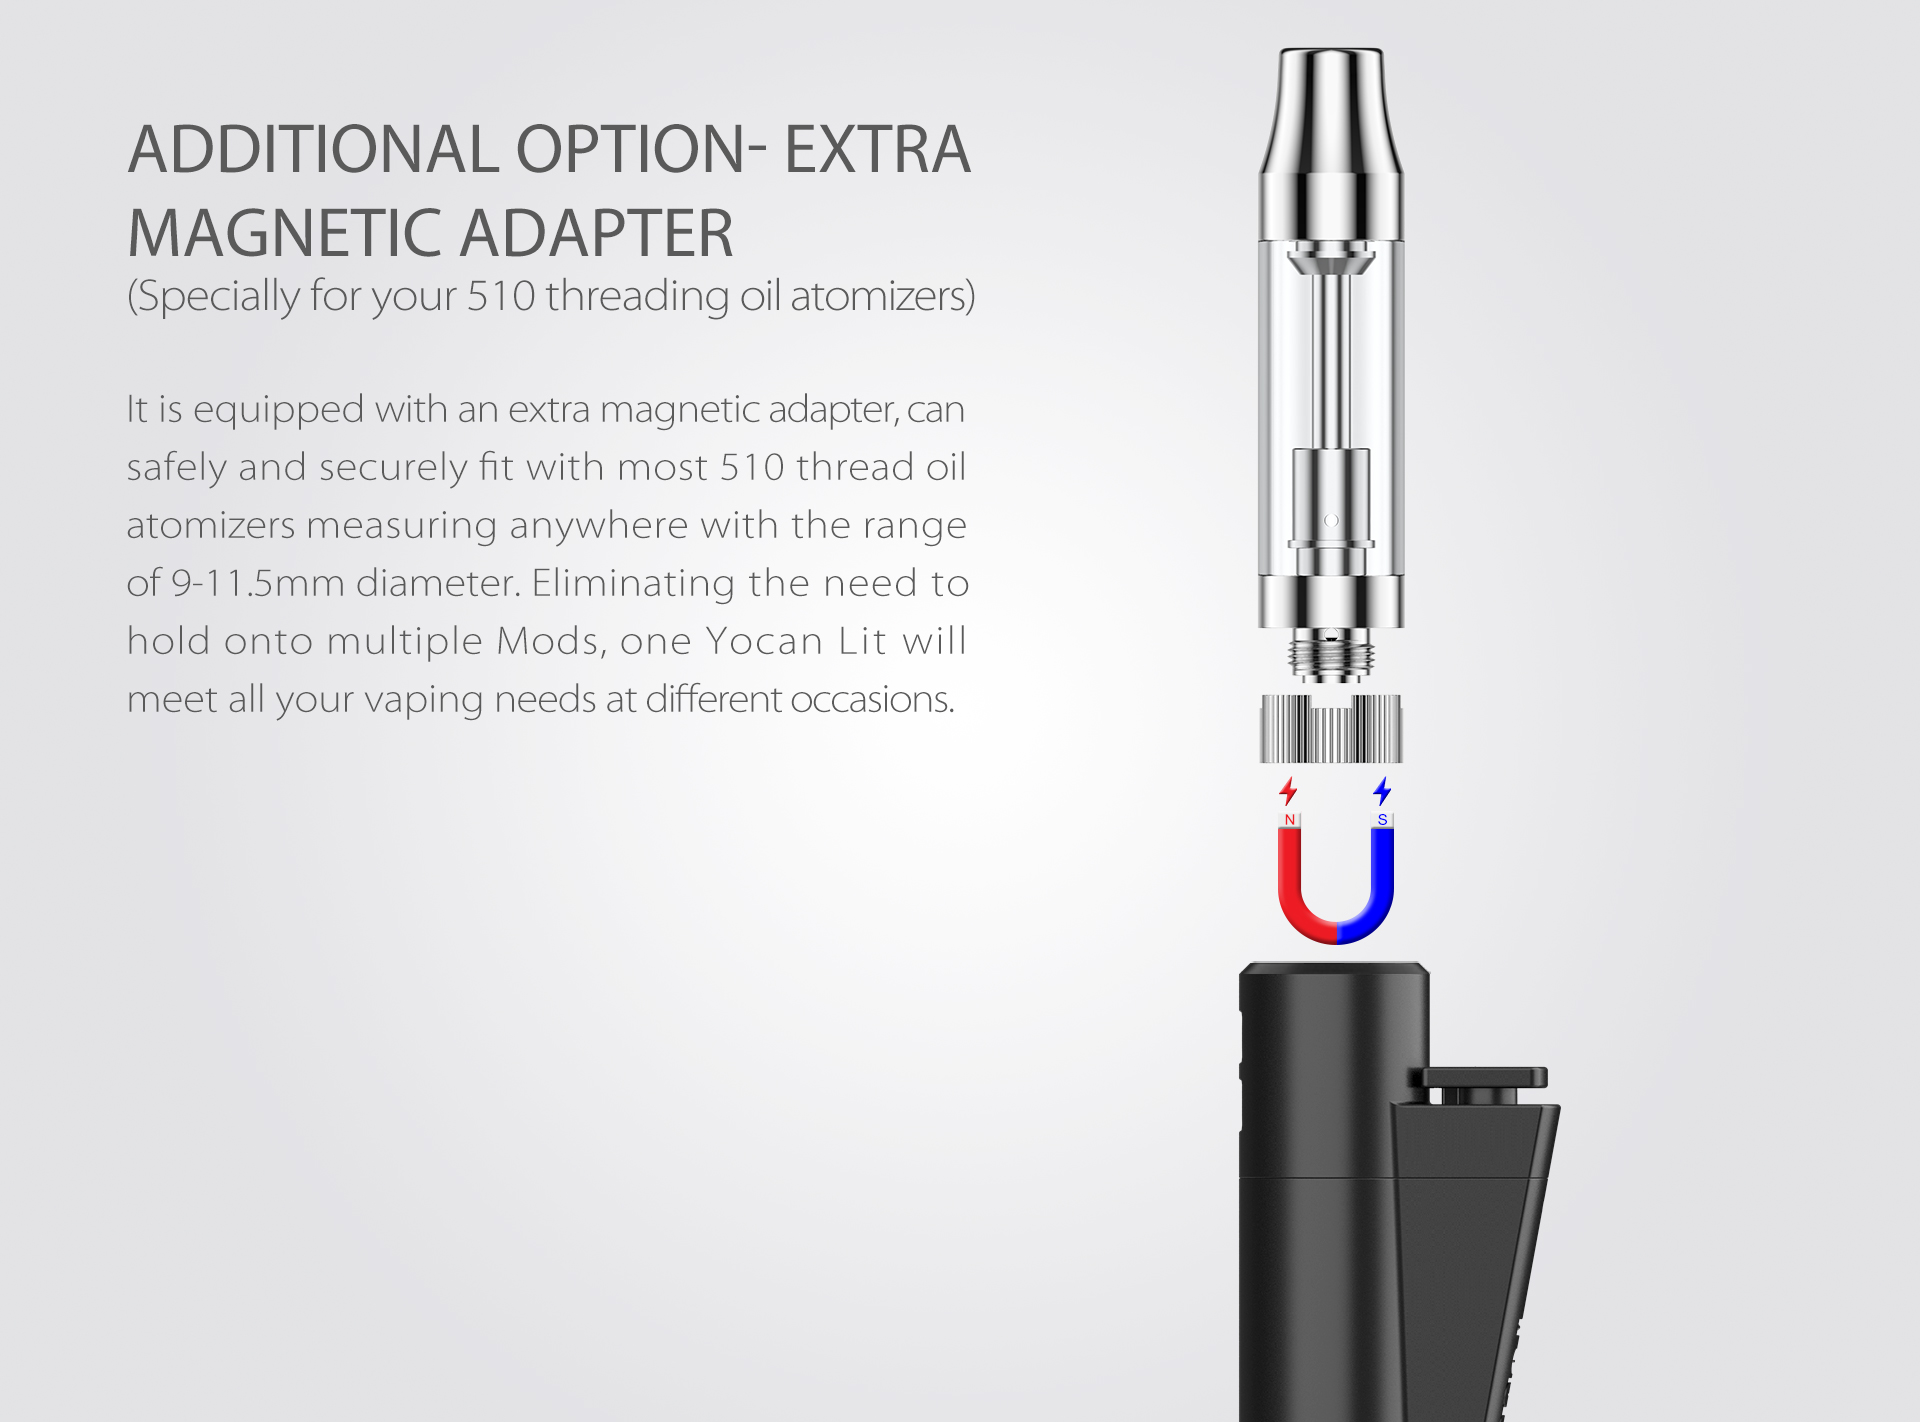 Yocan Lit Twist Concentrate Vaporizer comes with extra magnetic adapter.